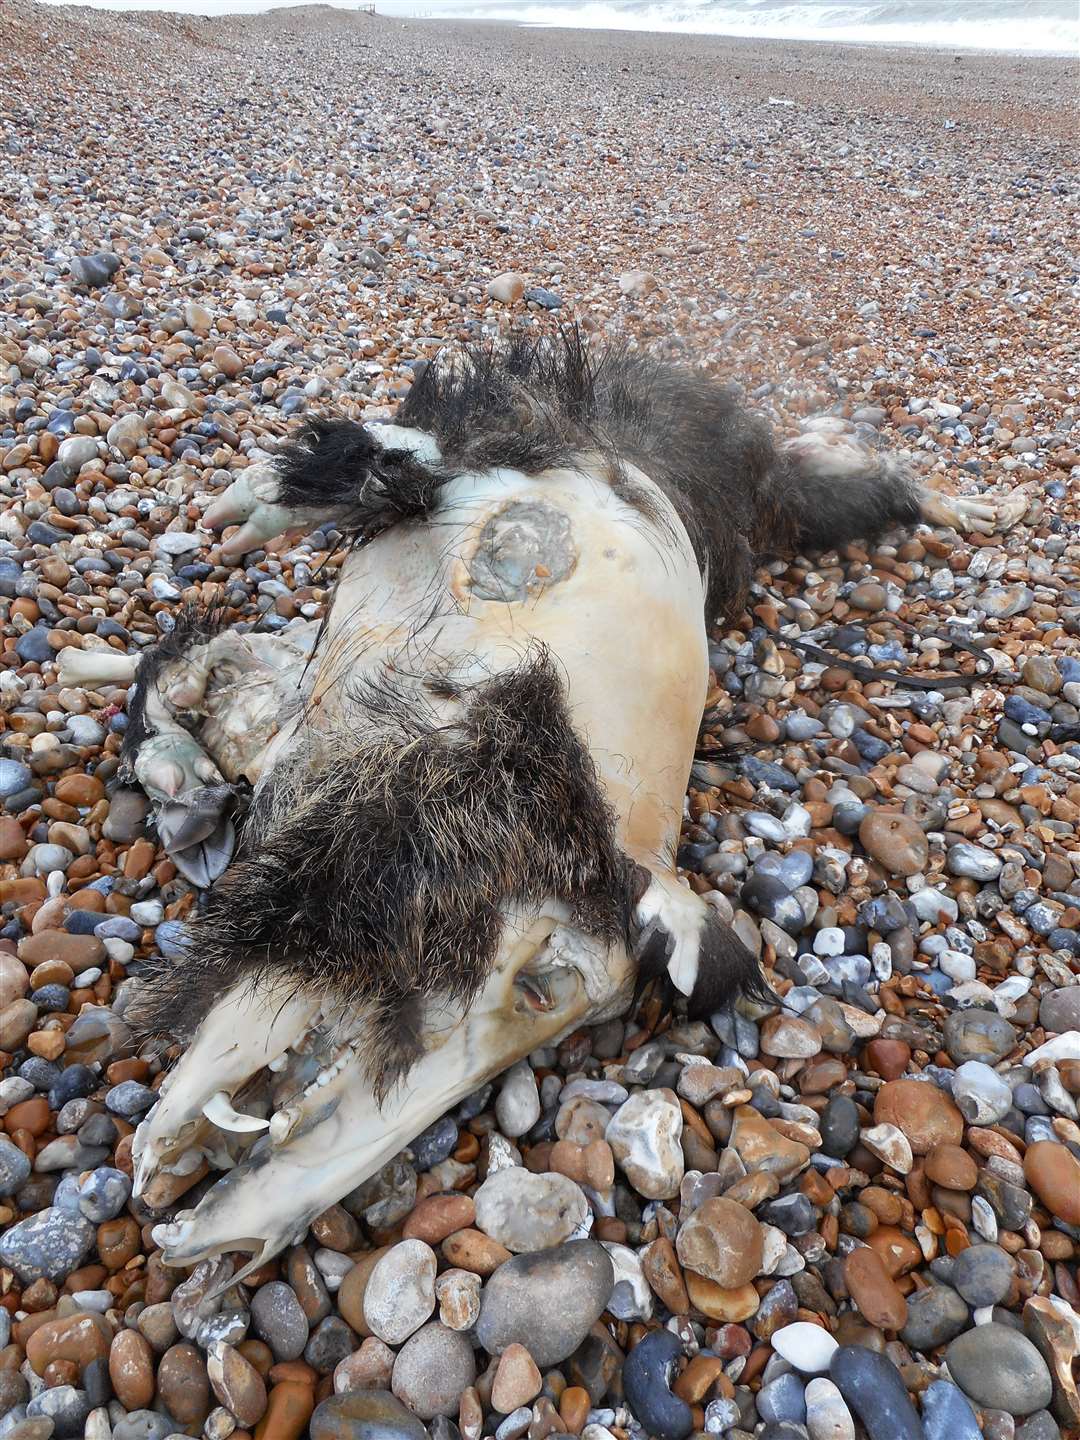 The carcass of the wild boar found on the beach near Lydd